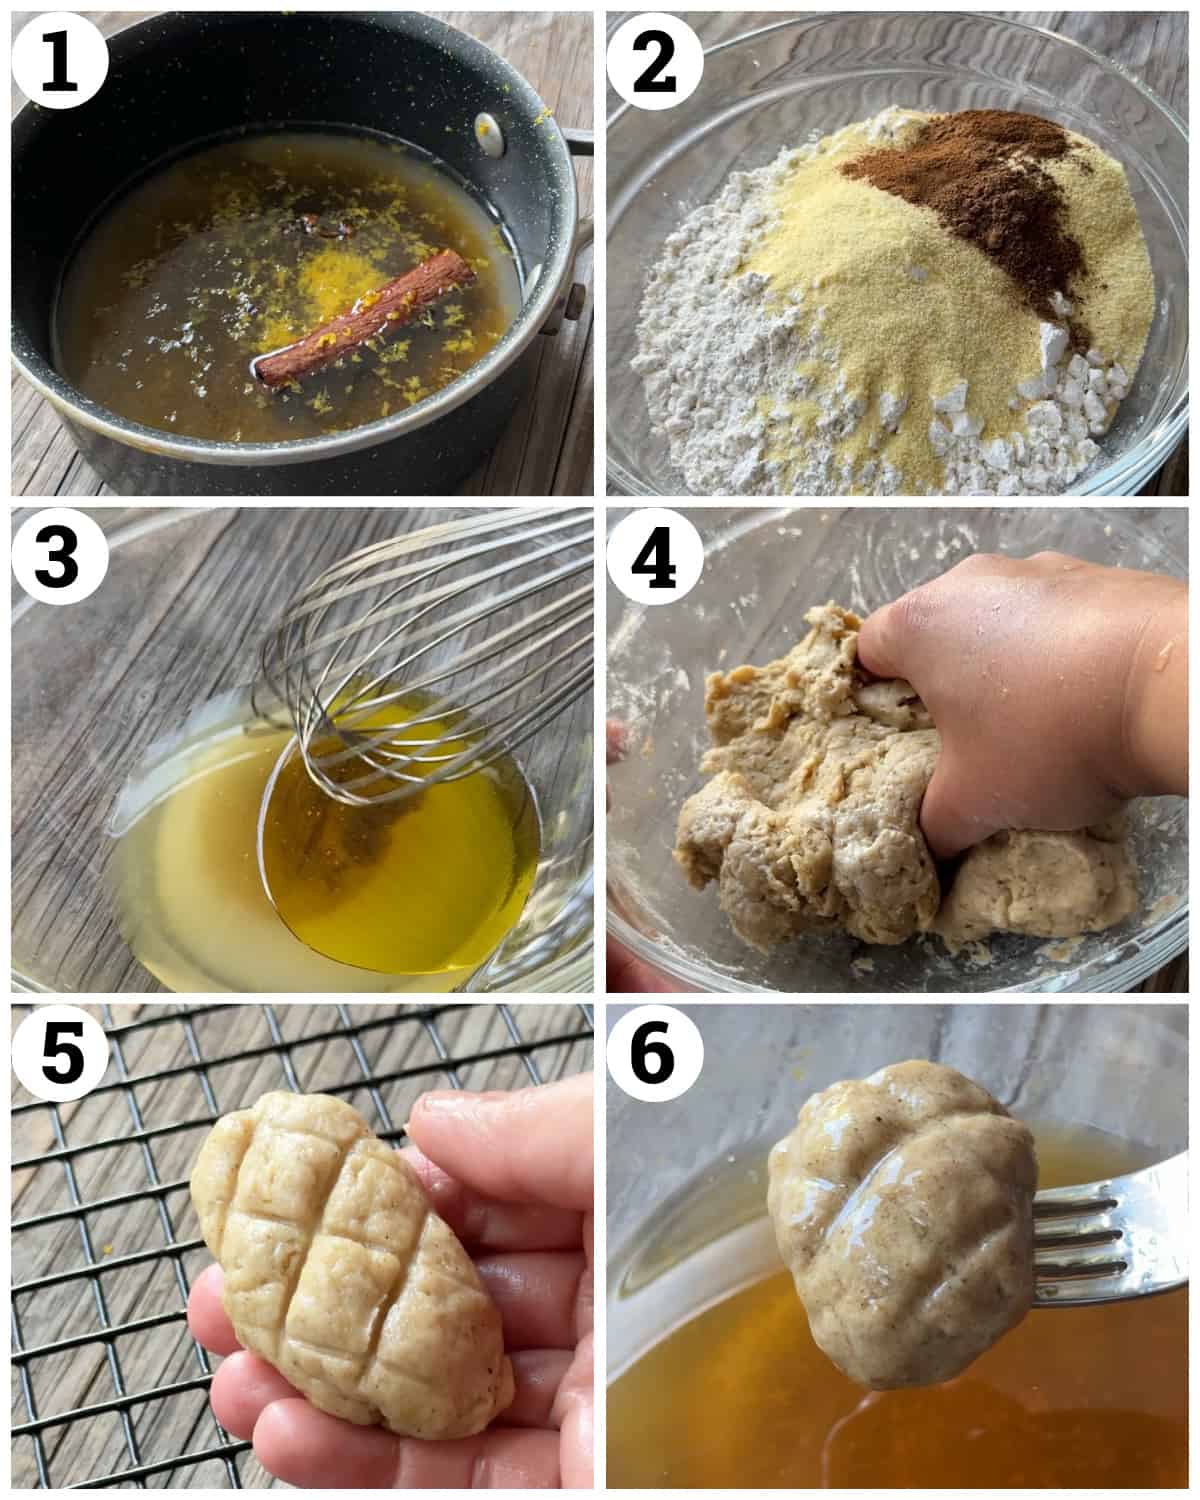 Make the syrup and the dough. Shape the cookies, bake and soak in the syrup. 